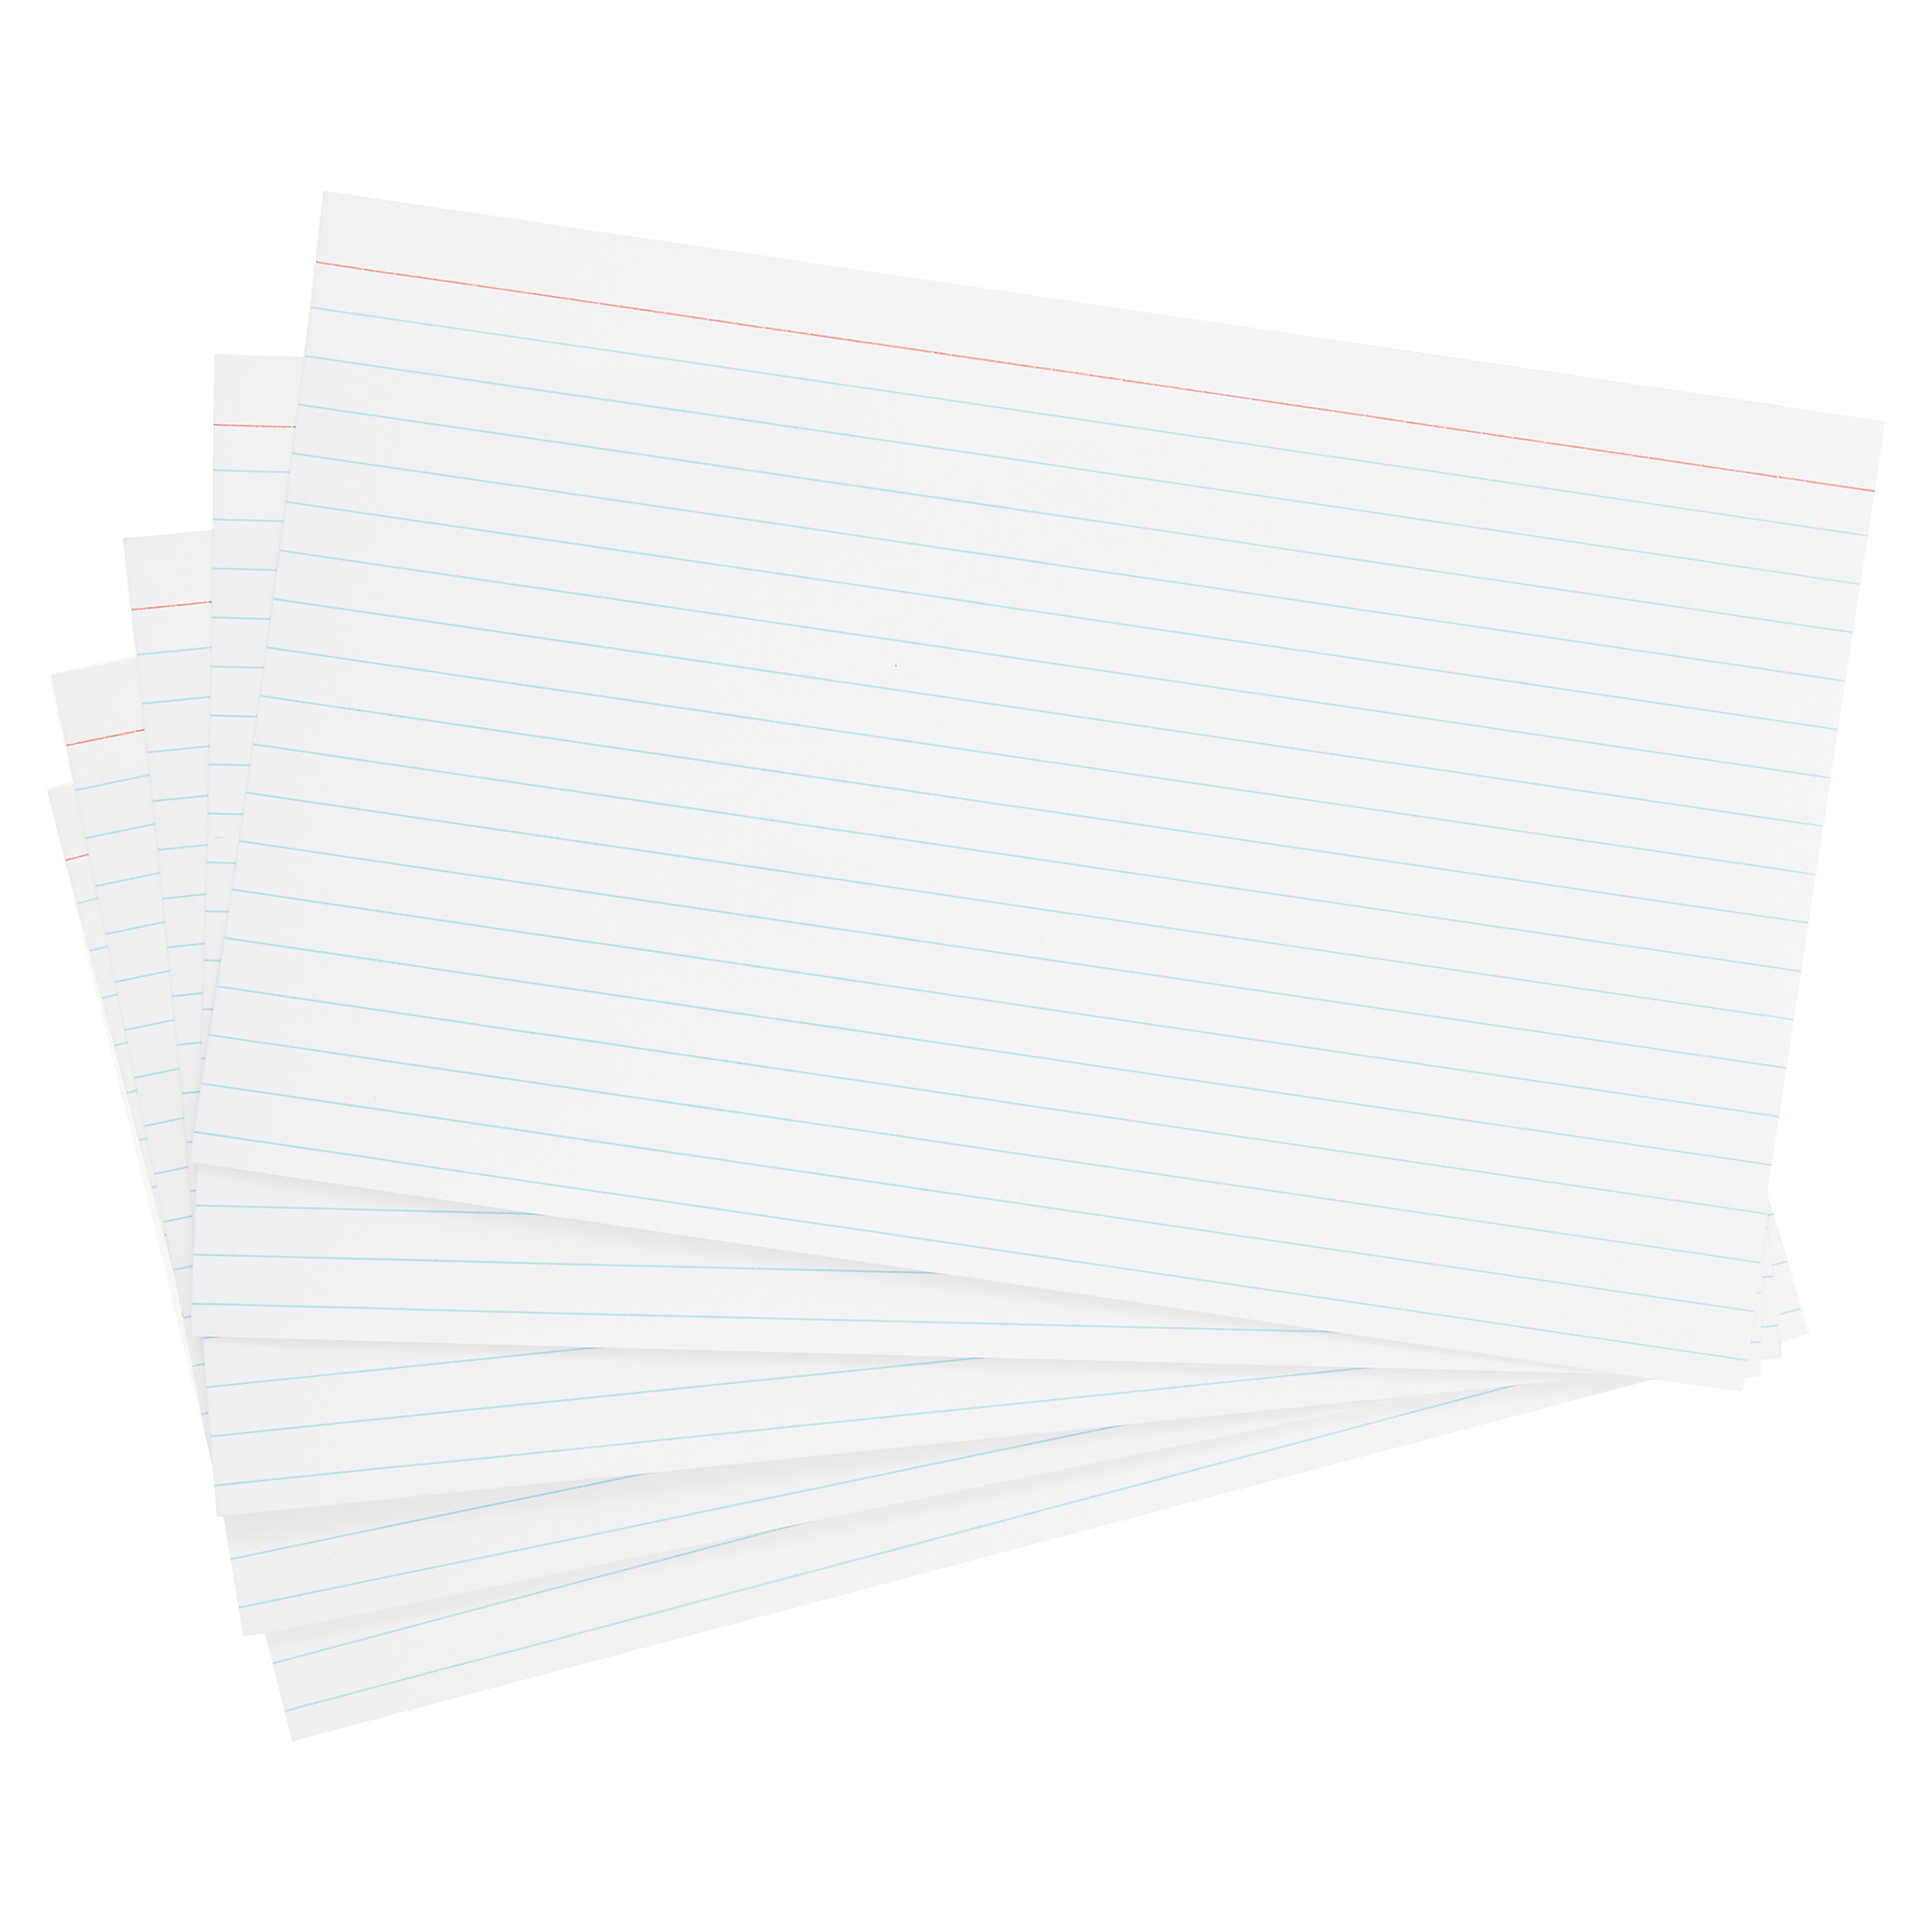 Pen + Gear Index Card, White, 5x 8, Ruled, 100 Count 